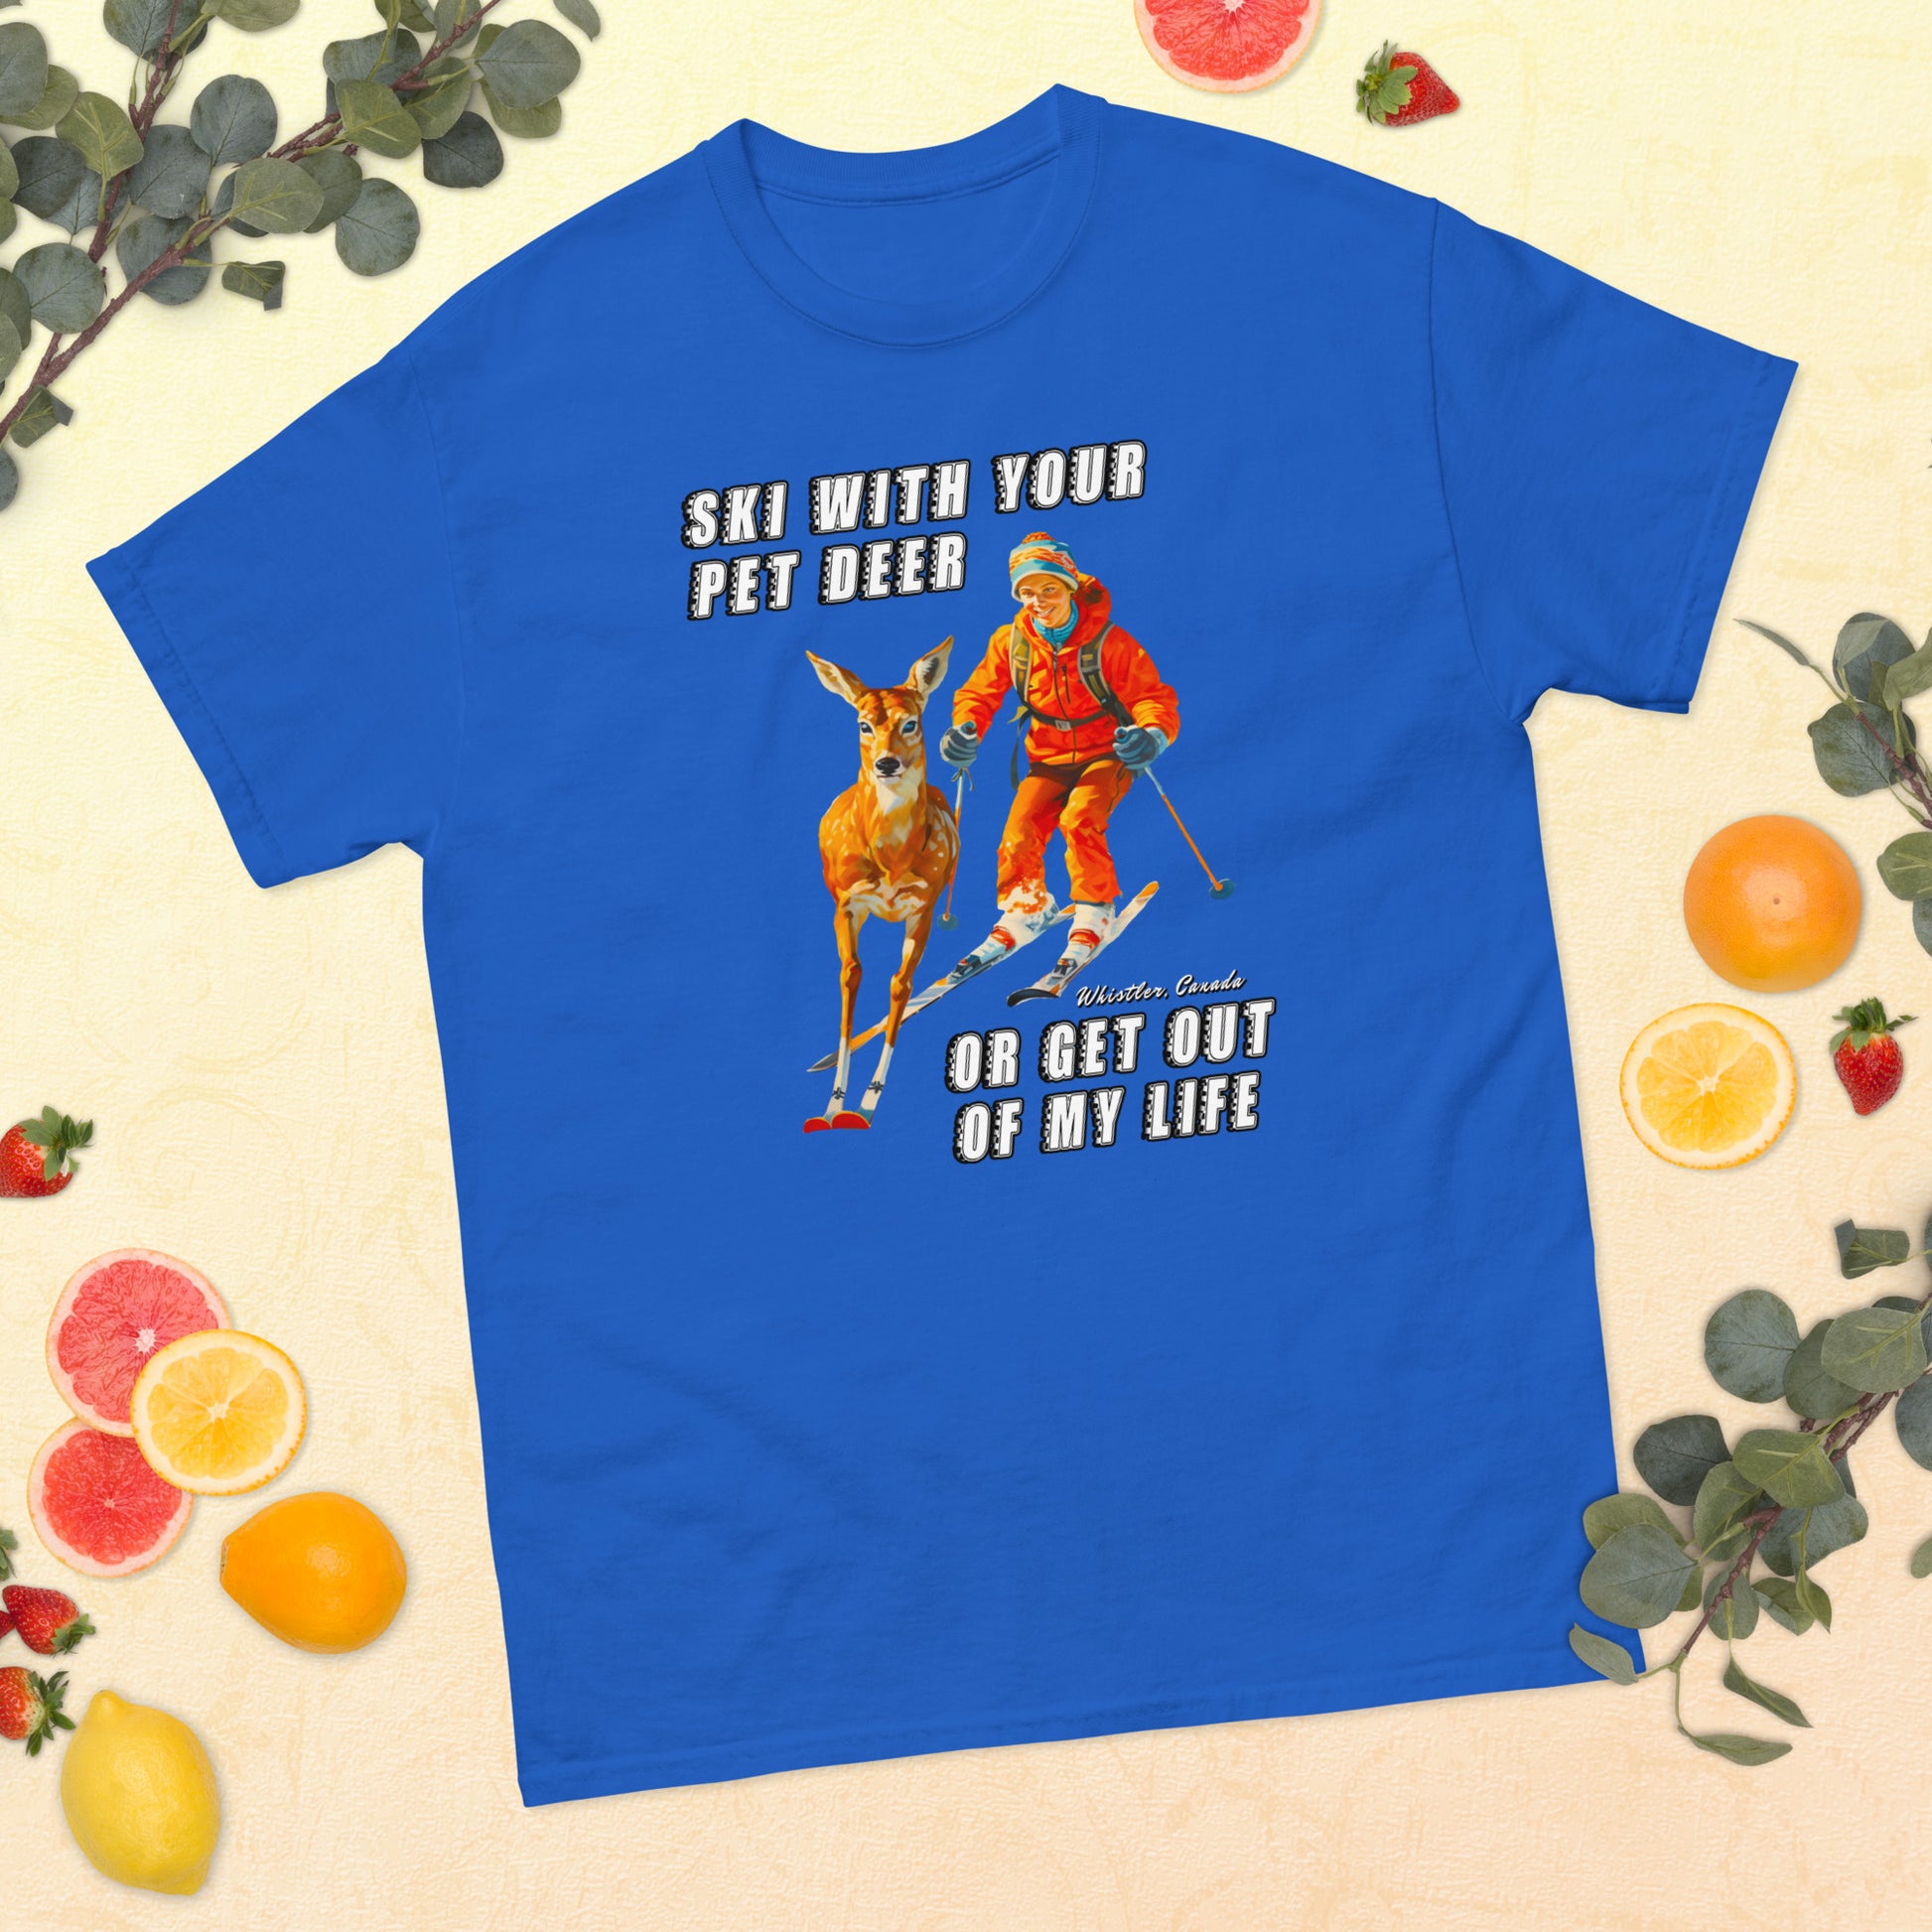 Ski with your pet deer or get out of my life printed t-shirt by whistler shirts